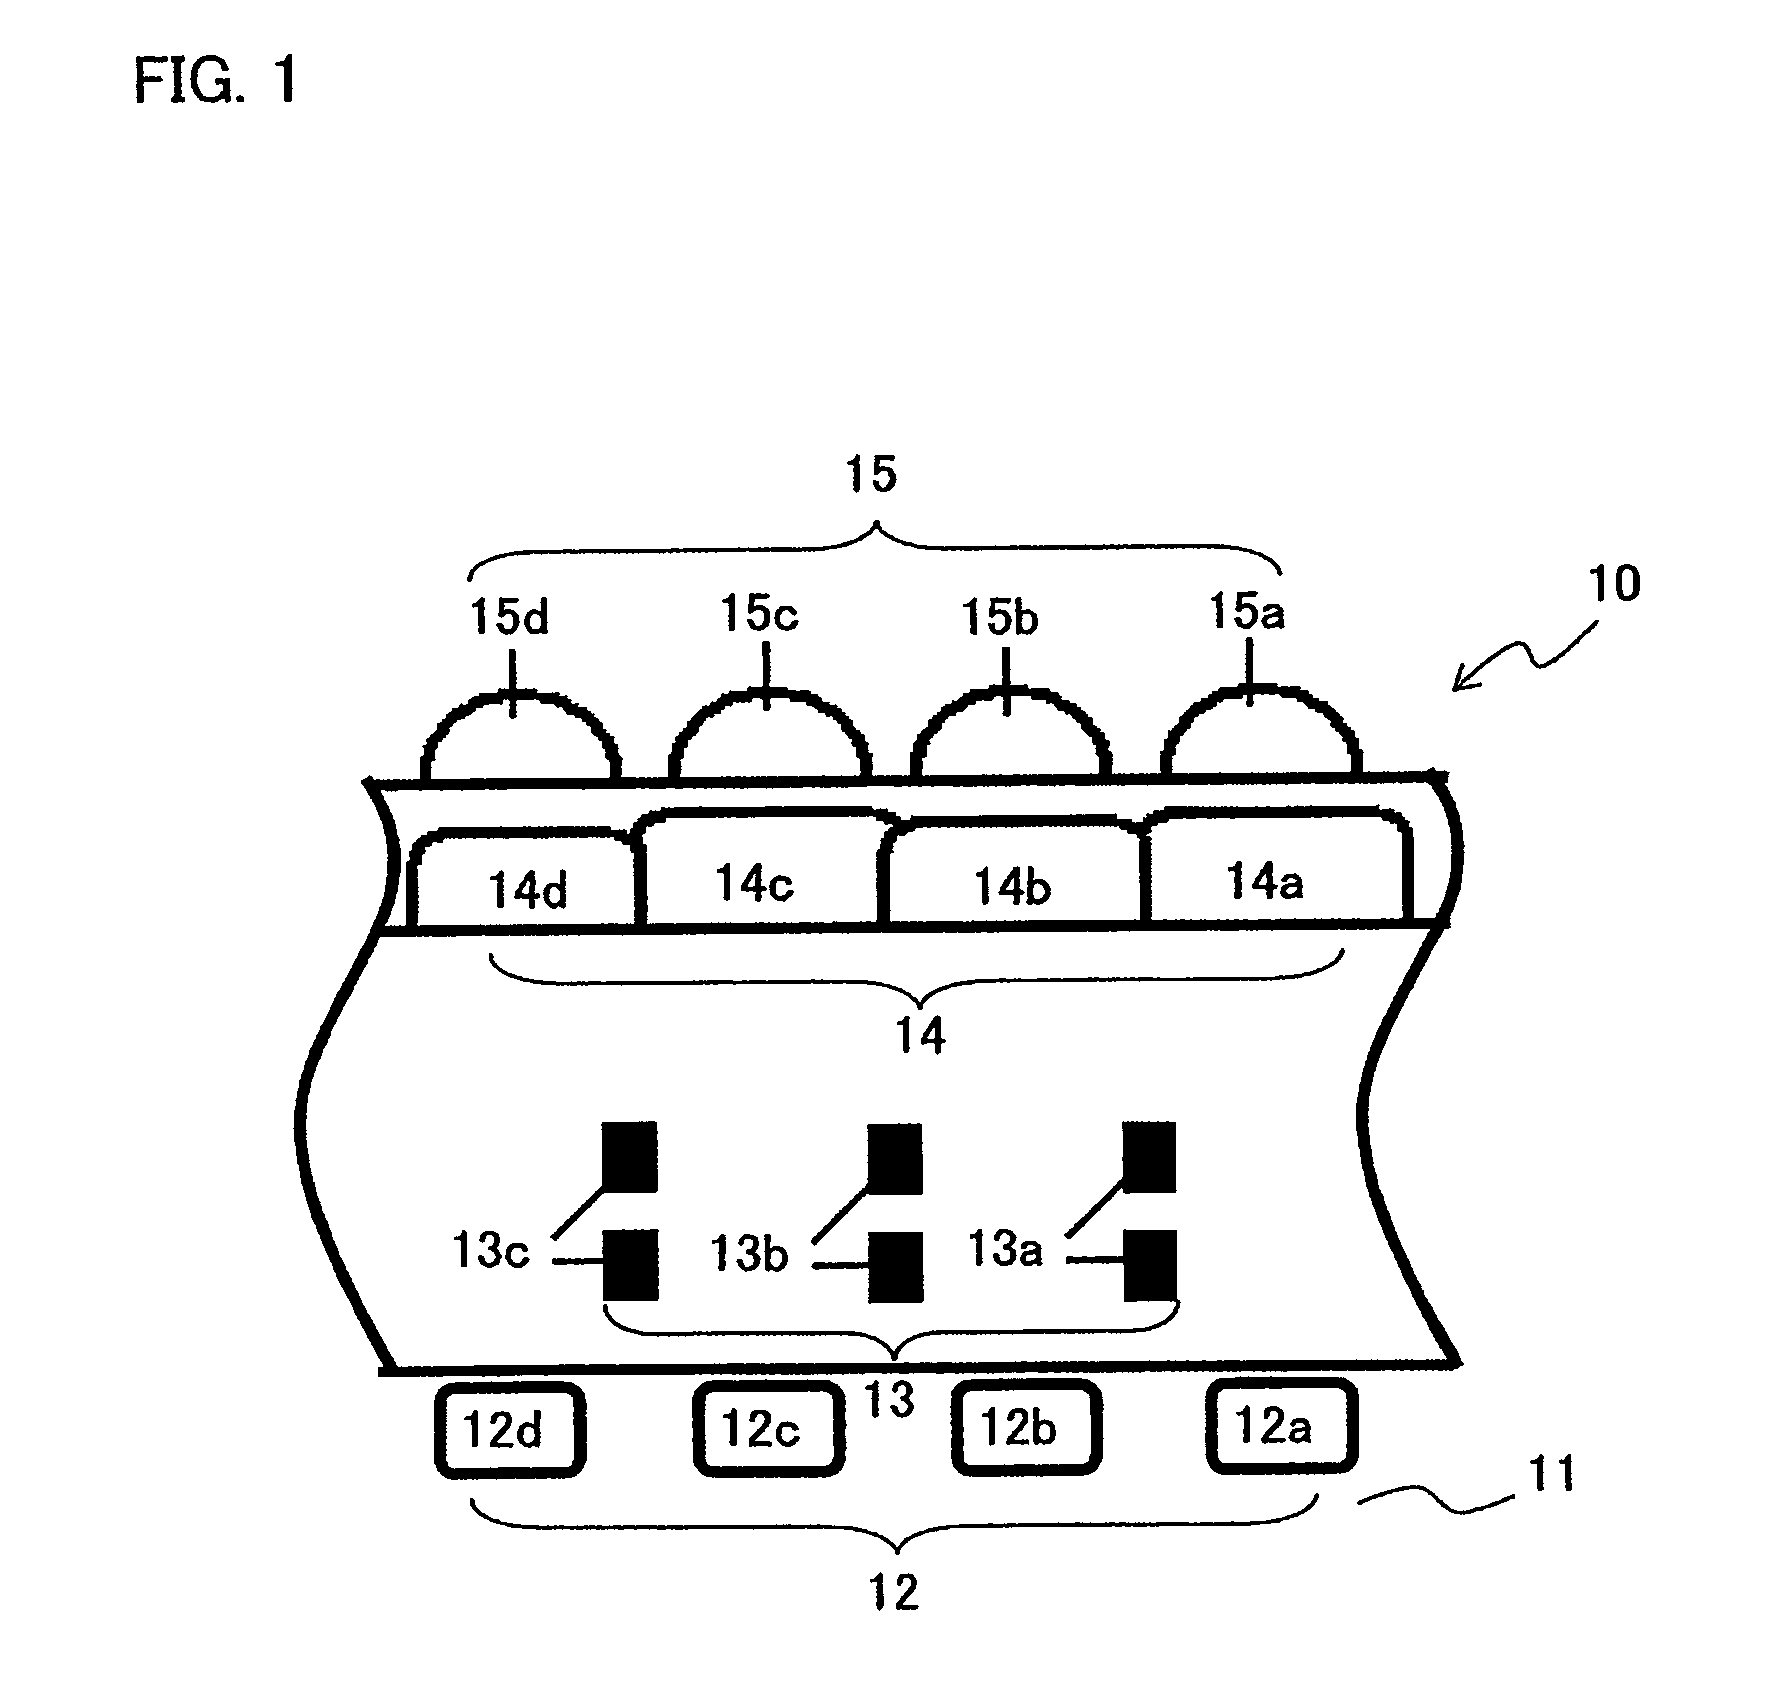 Solid-state image capturing device, solid-state image capturing apparatus, and electronic information device